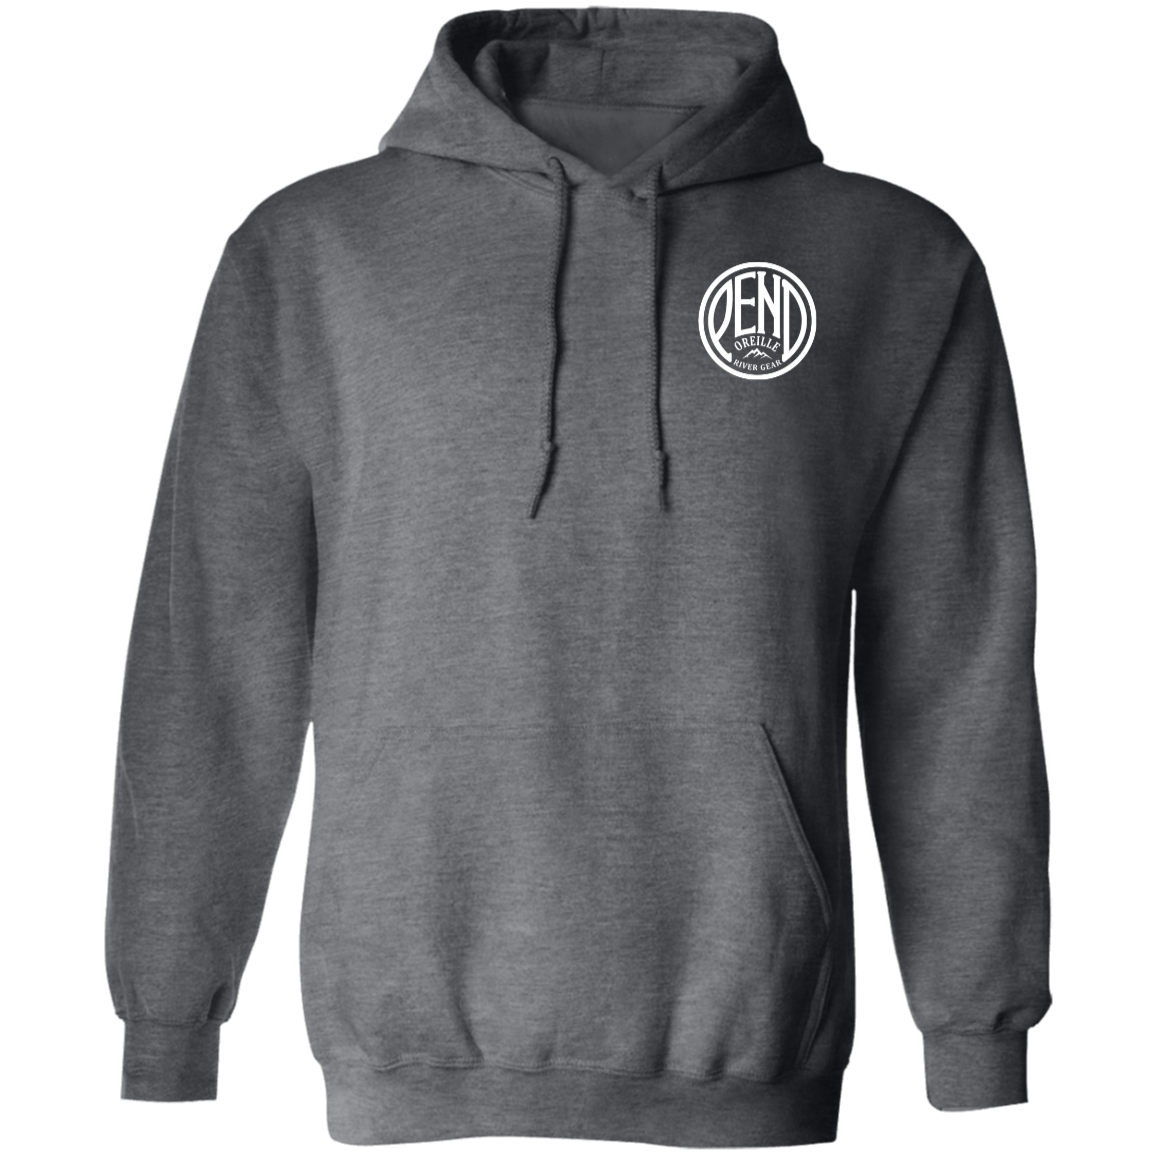 Float Pend (Front & Back) - Hoodie